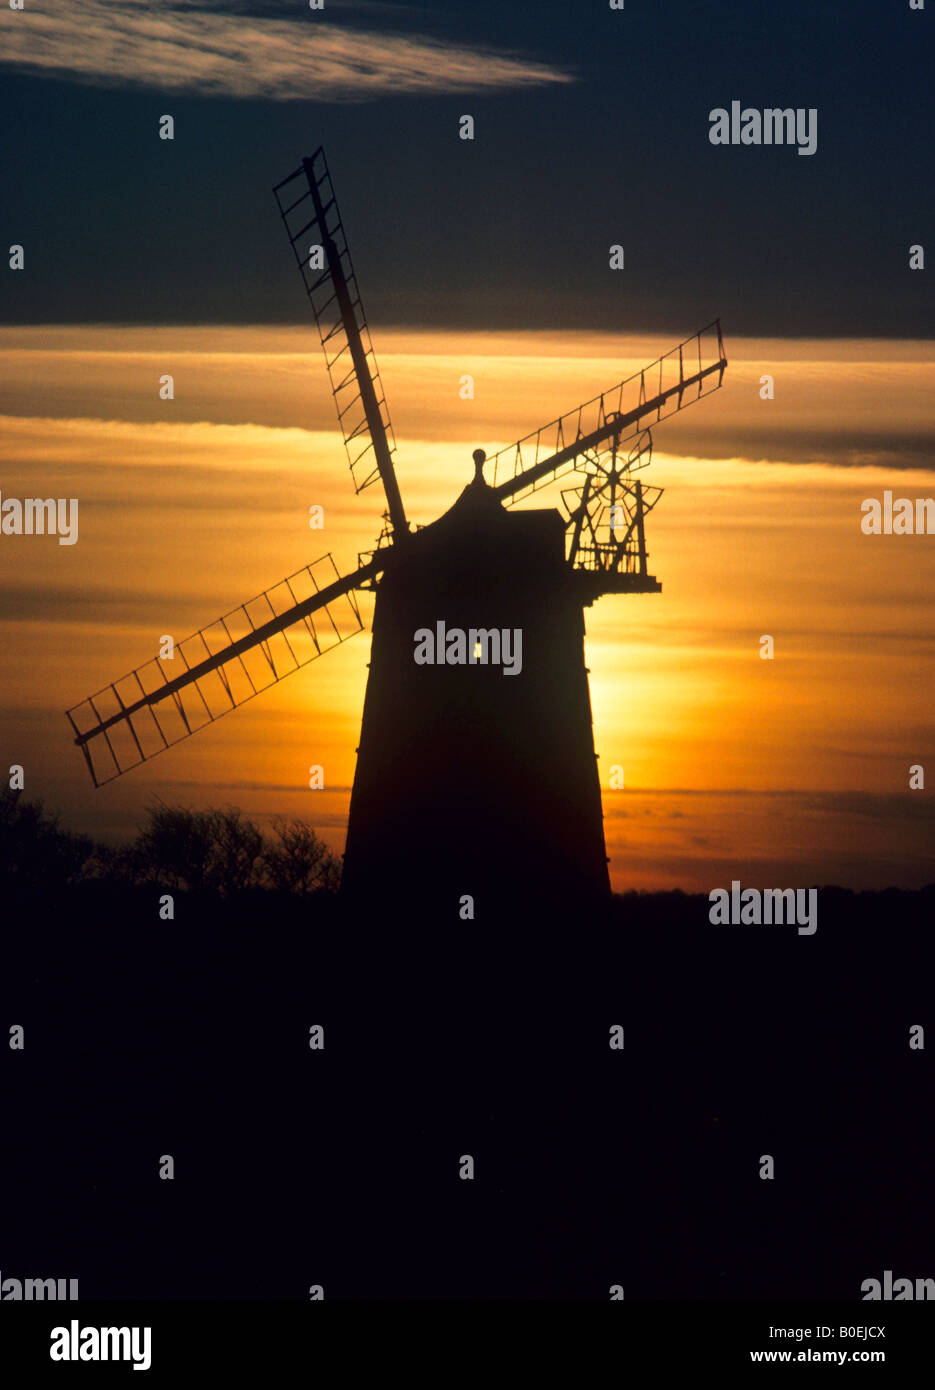 Moulin d'ossature Burnham Overy Norfolk poster mill sunset sails le paysage anglais East Anglia Angleterre UK Banque D'Images